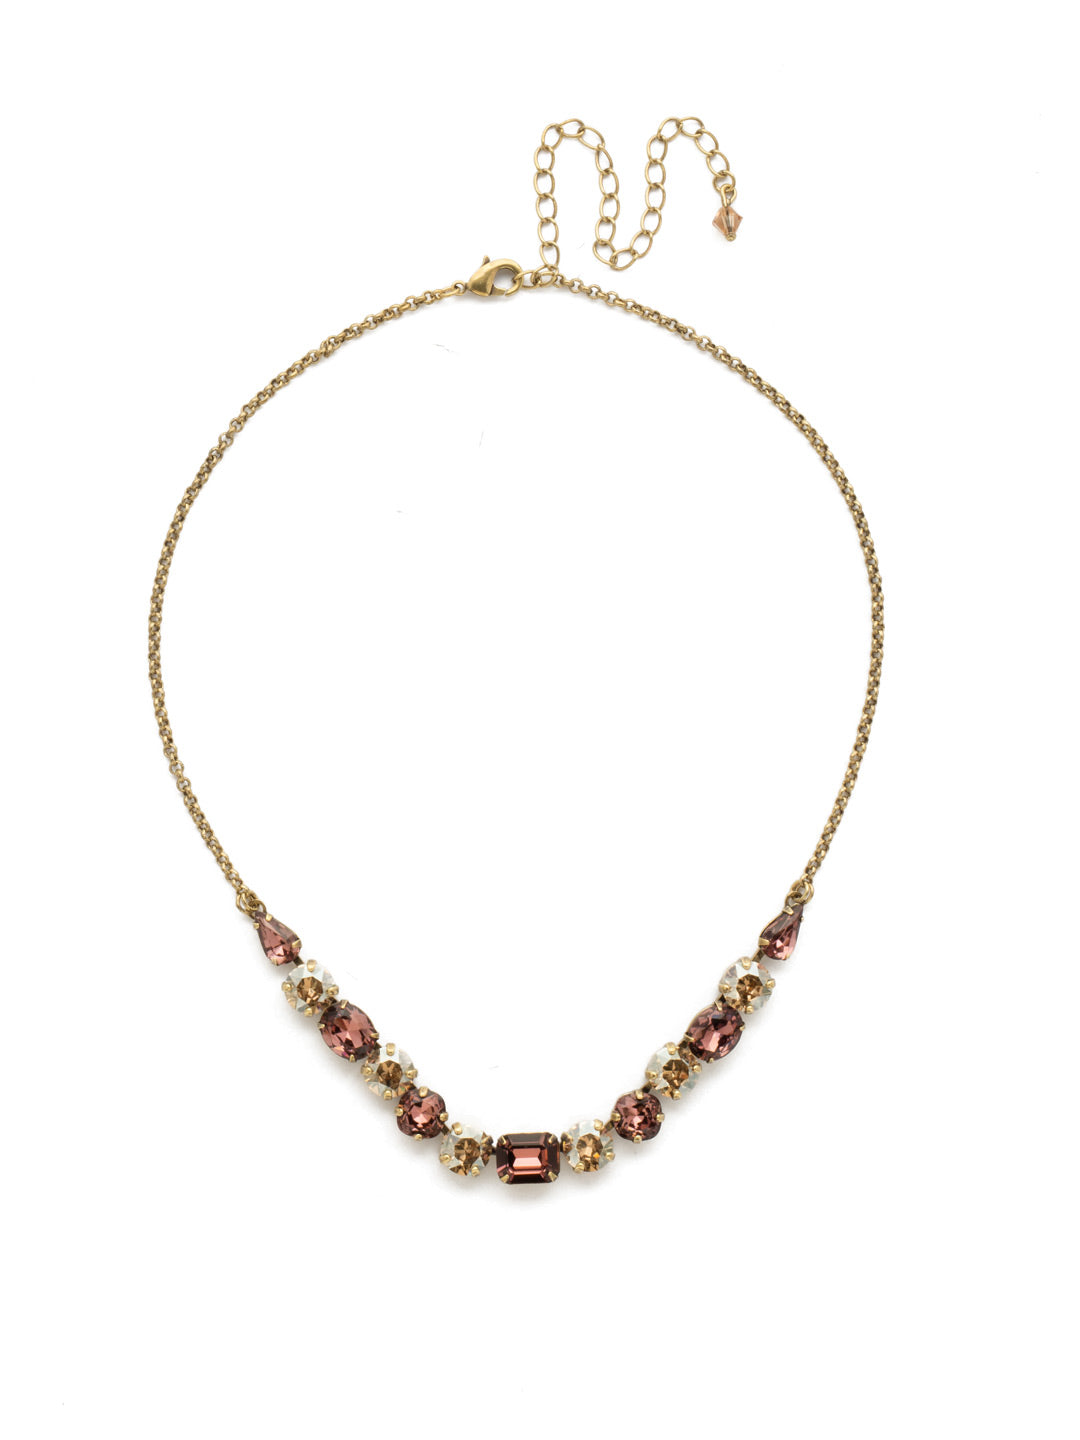 Tansy Half Line Tennis Necklace - NDQ14AGMMA - <p>Oval, round, emerald, pear and cushion cut crystals are accented by a delicate chain for subtle sparkle that looks great layered or worn solo. From Sorrelli's Mighty Maroon collection in our Antique Gold-tone finish.</p>